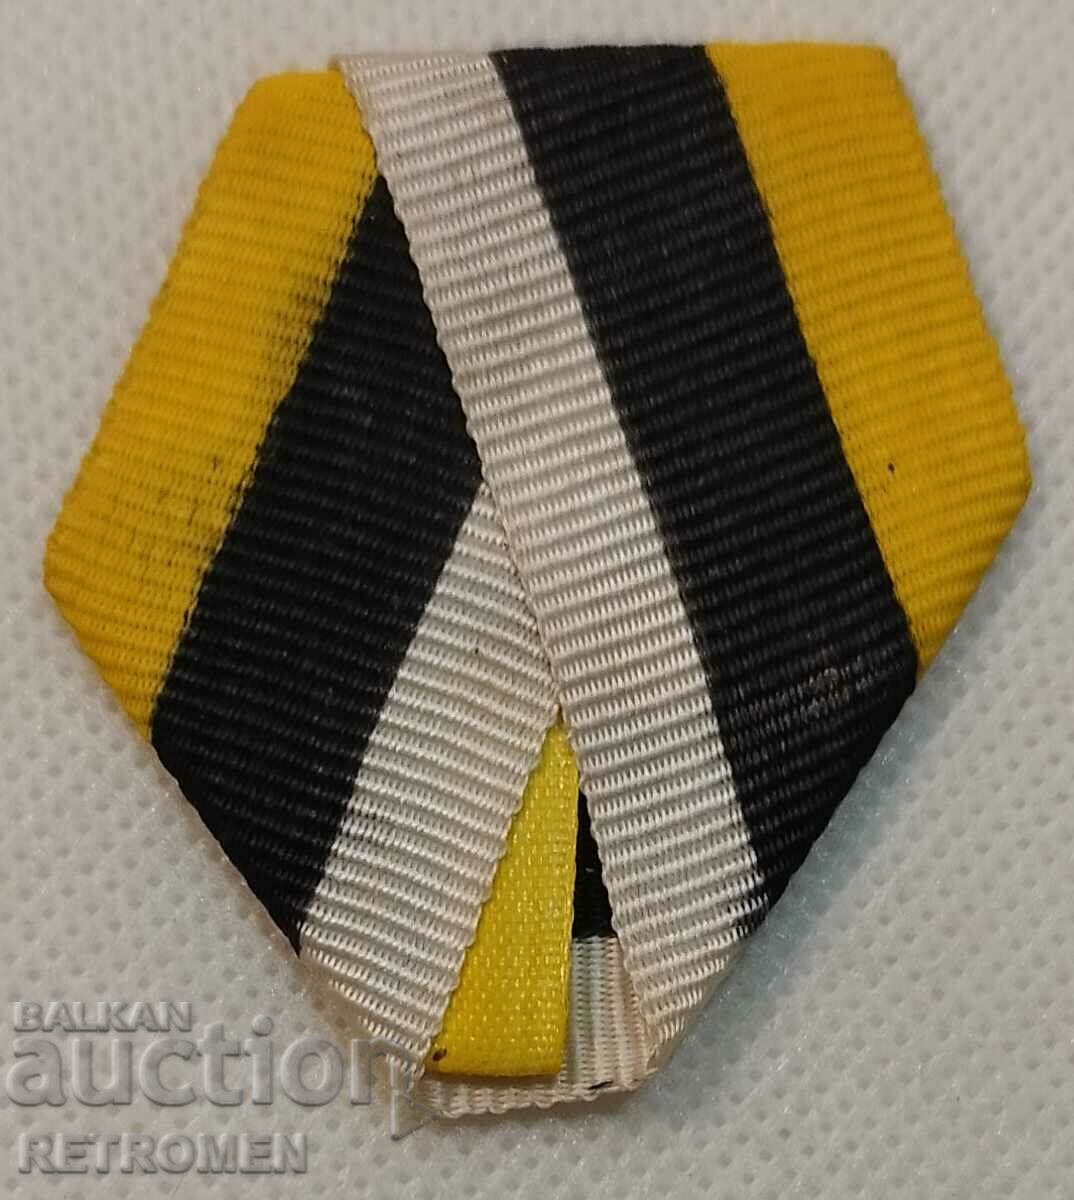 Medal ribbon, insignia" For years served."